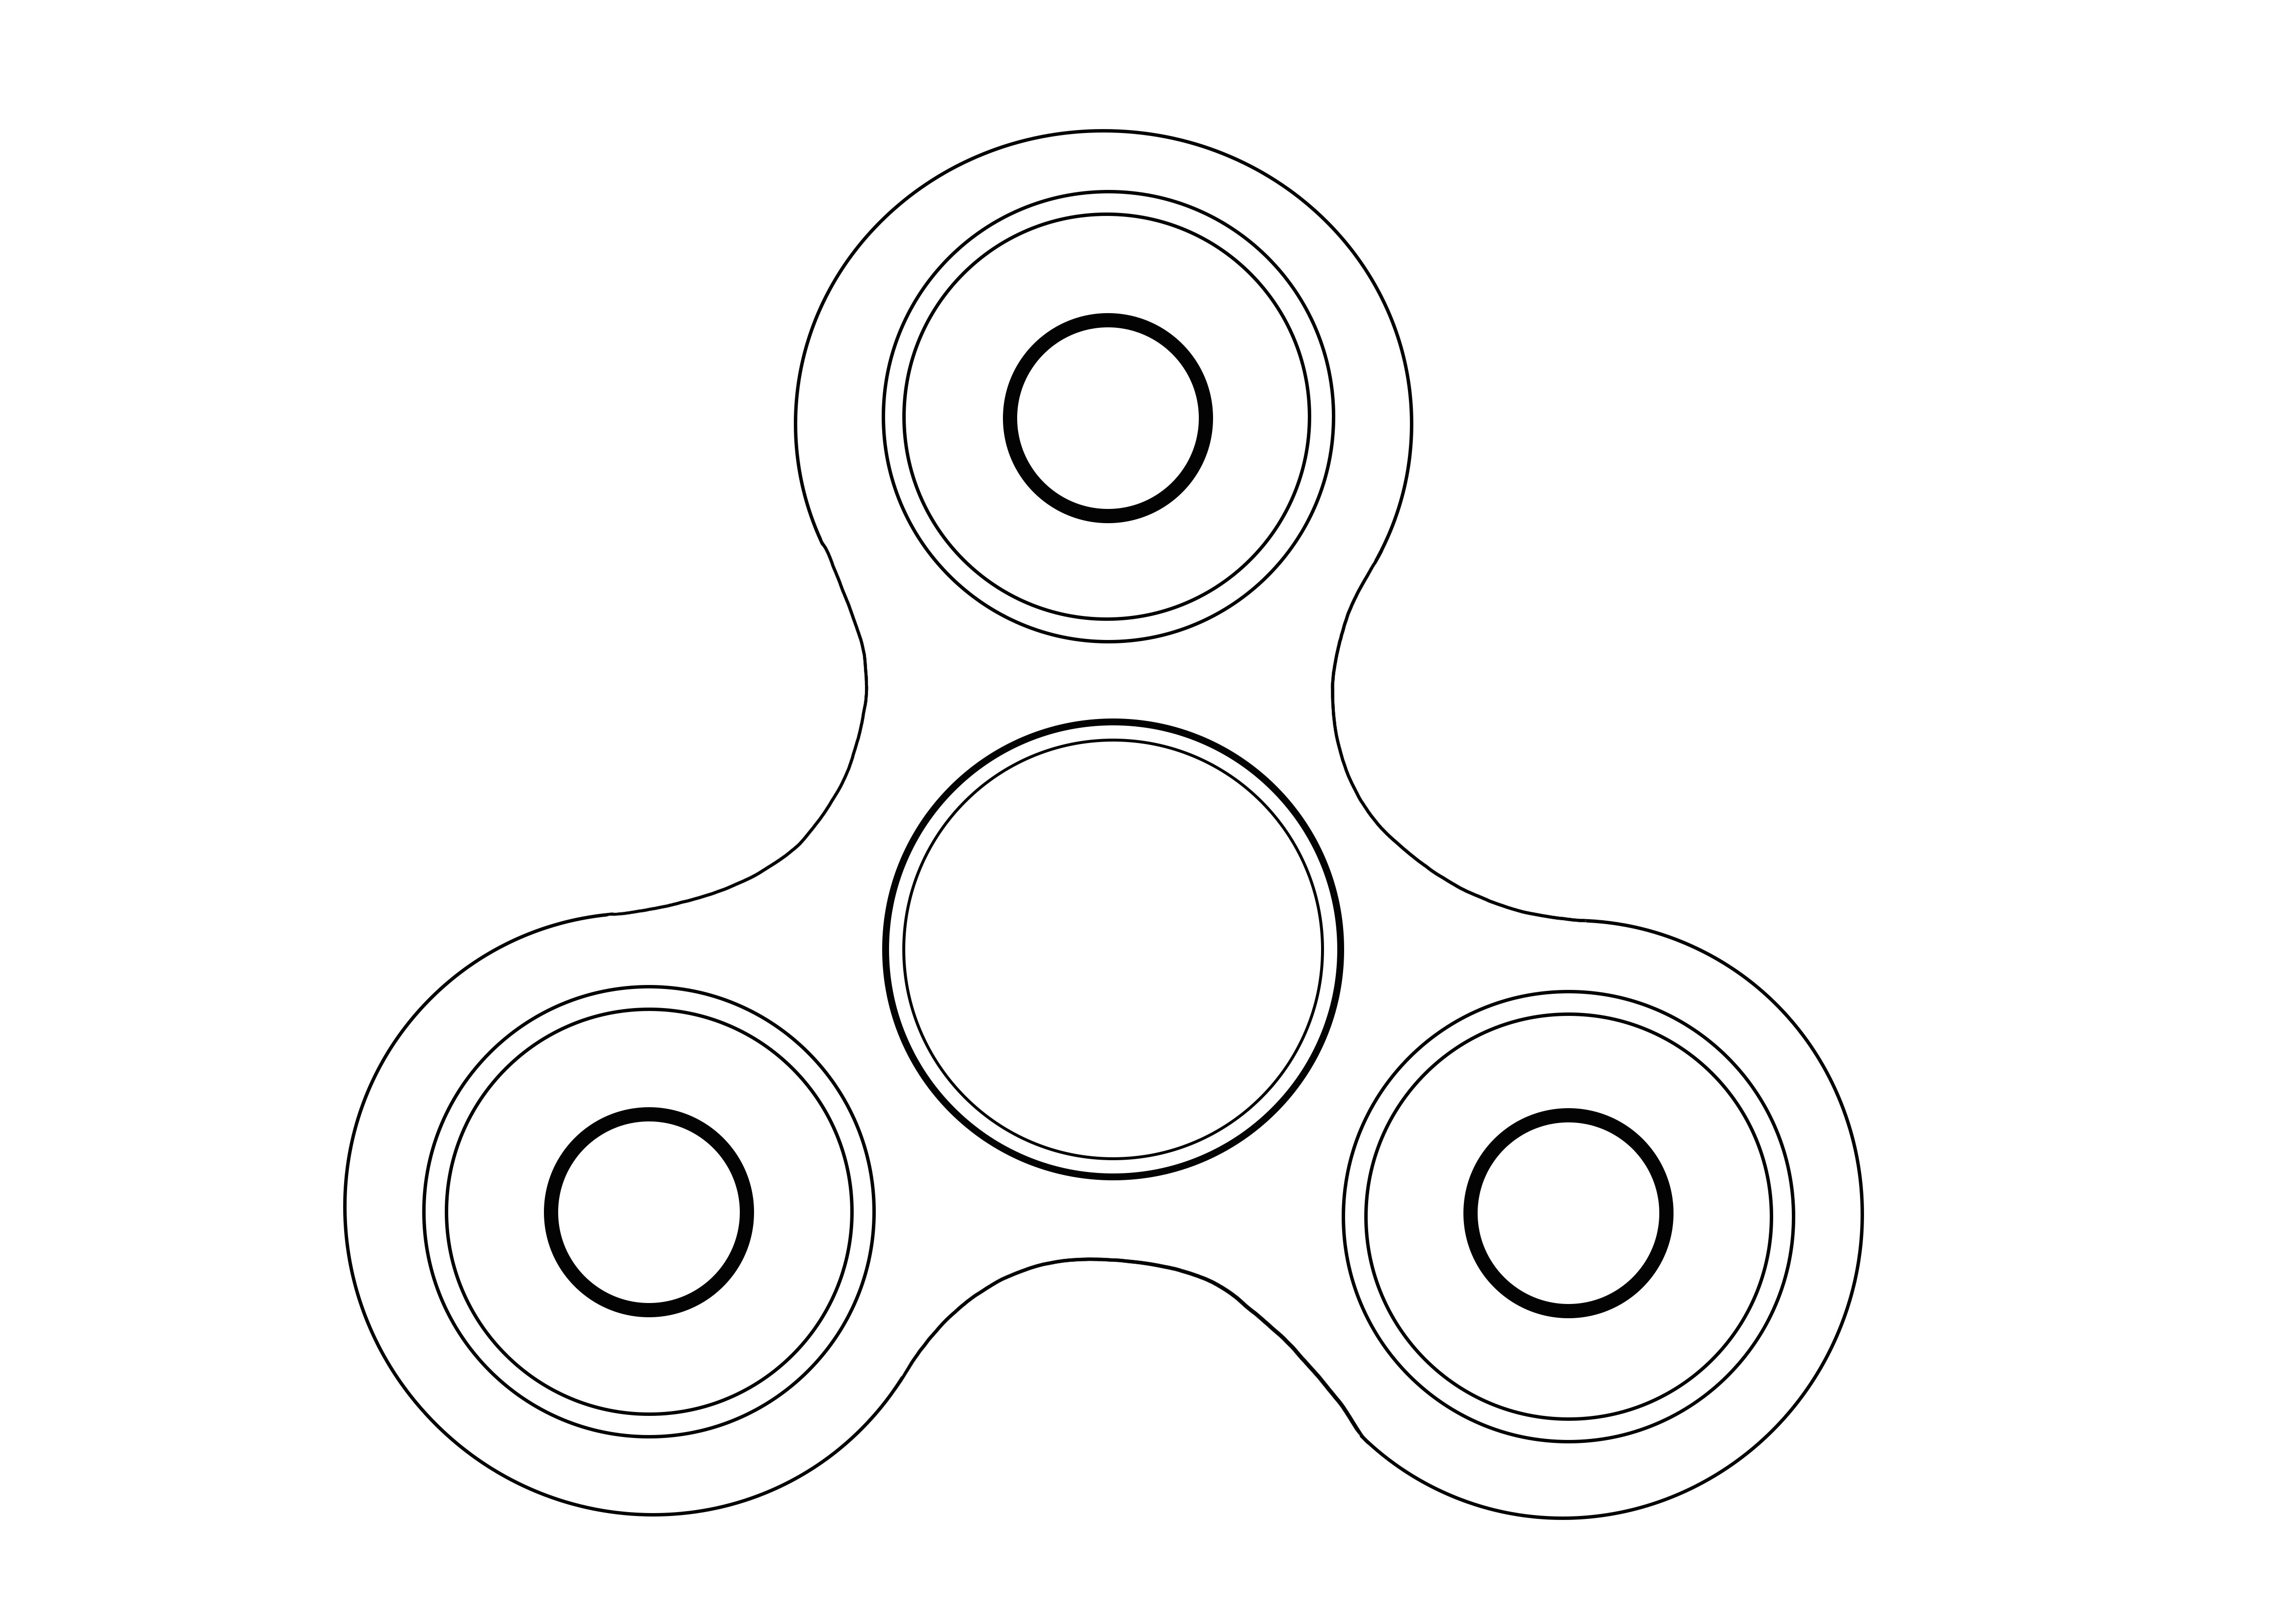 Here is a simple and free-to-print Fidget Spinner coloring sheet for kids